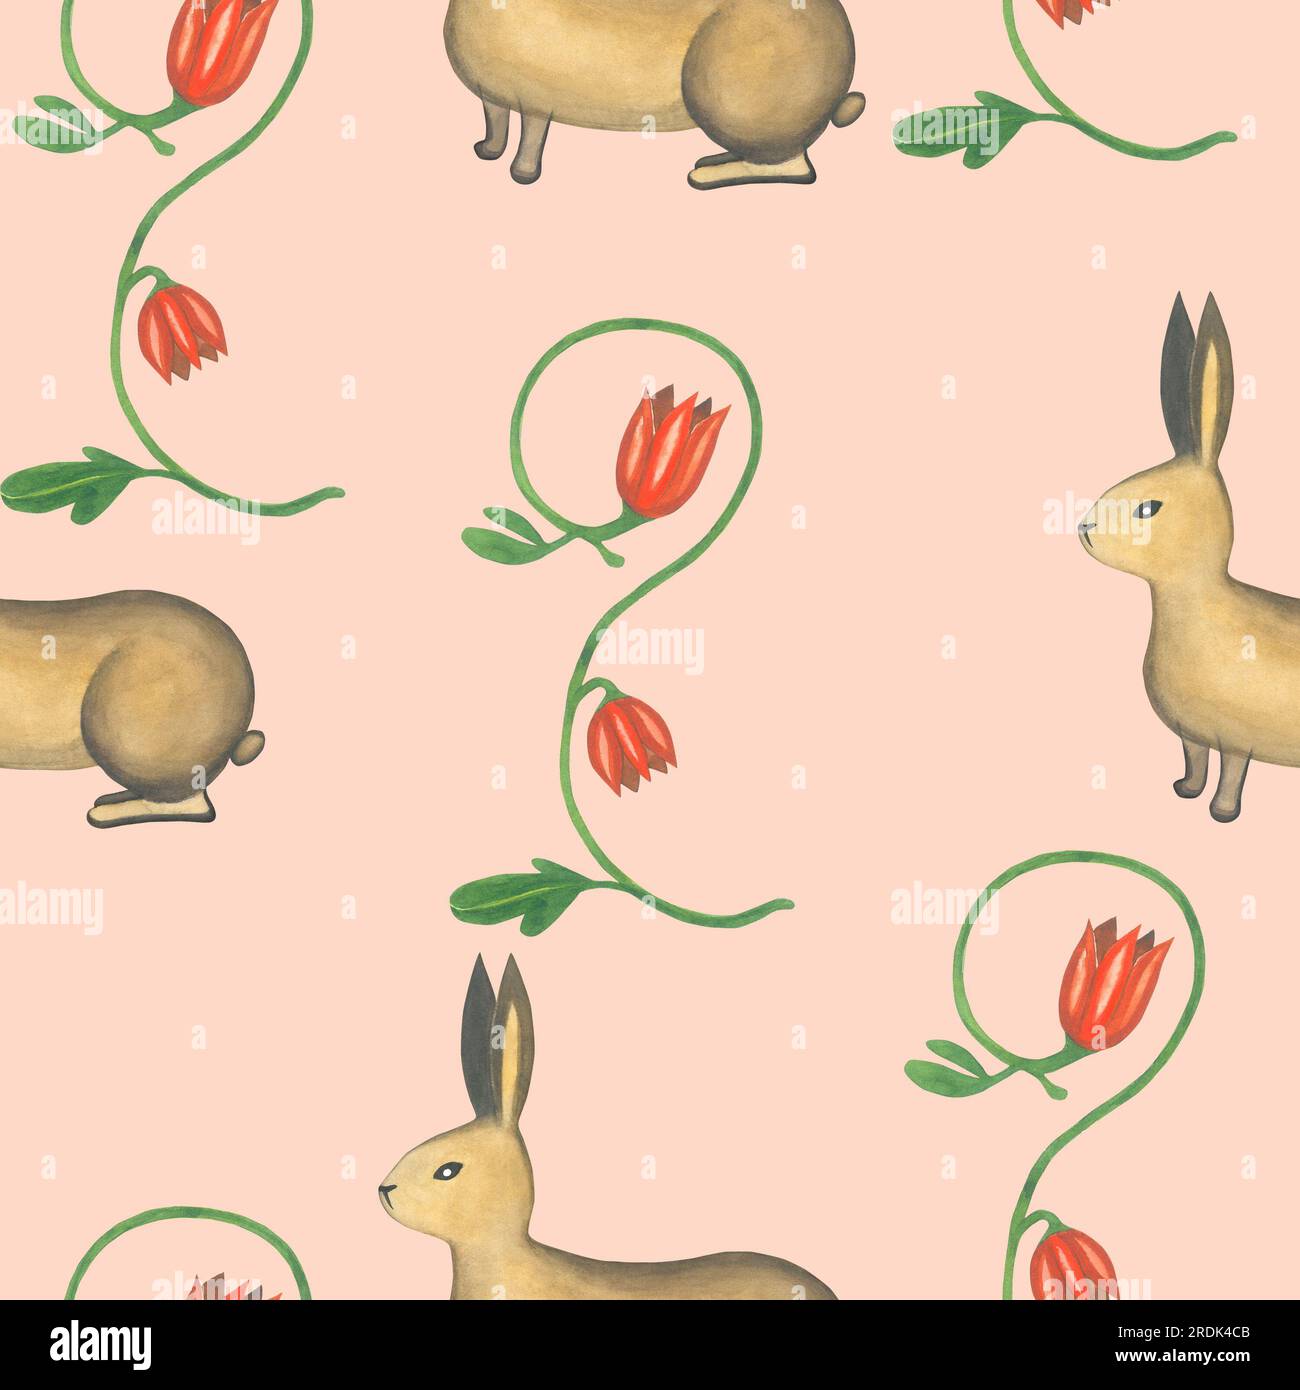 Watercolor illustrations rabbits and plants in medieval style. Seamless pattern hand drawn on a pink background. Medieval tapestry Stock Photo